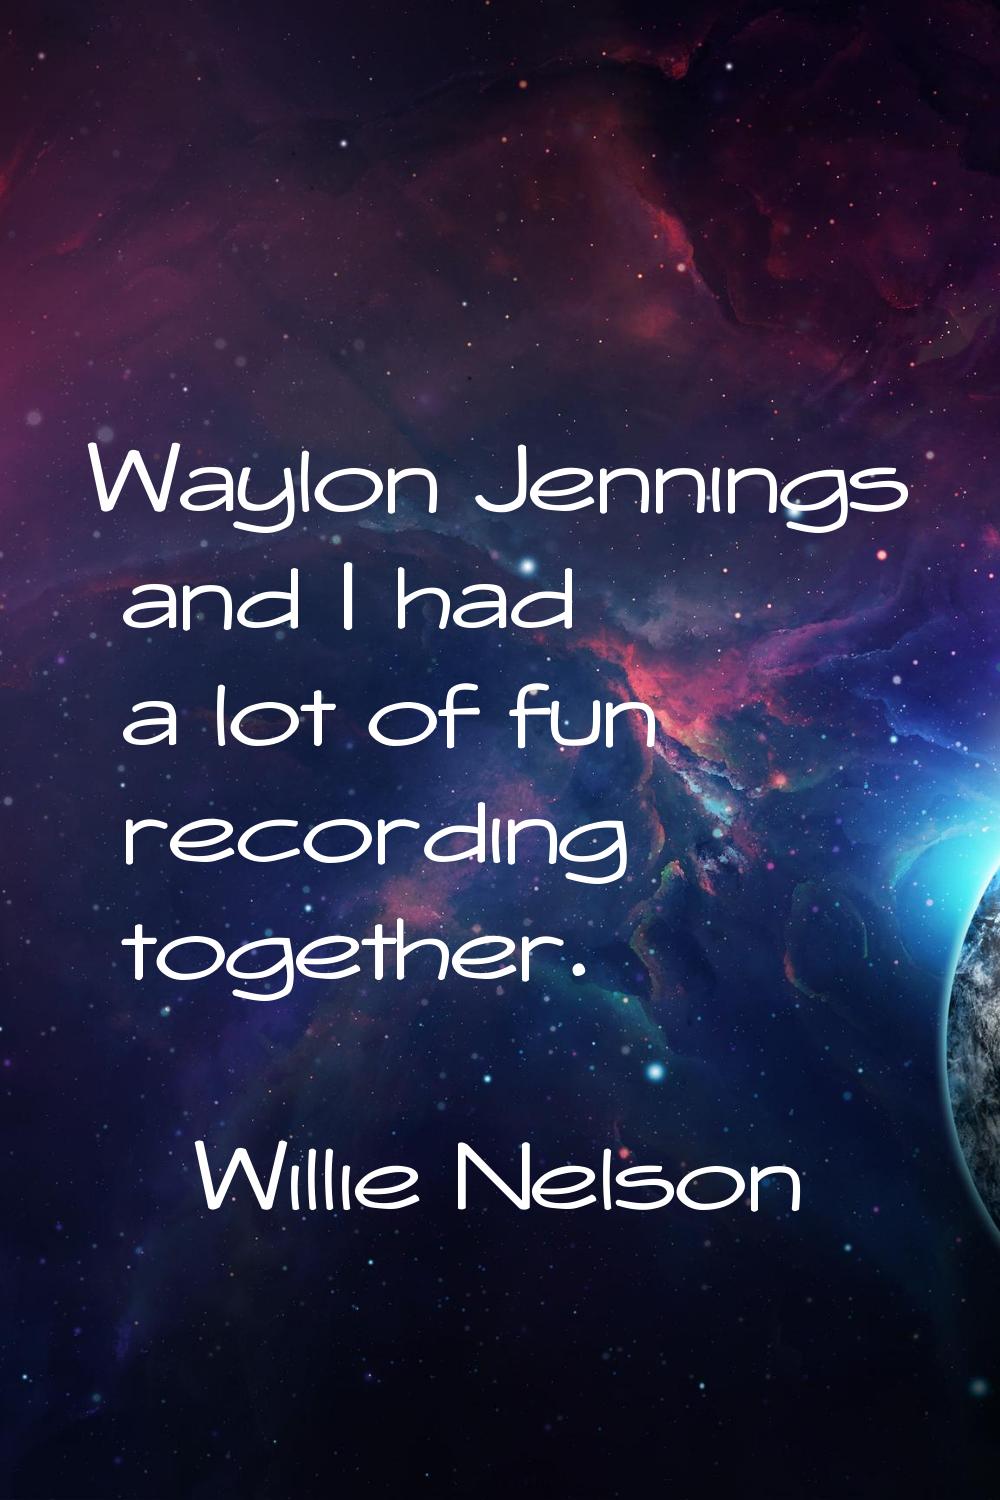 Waylon Jennings and I had a lot of fun recording together.